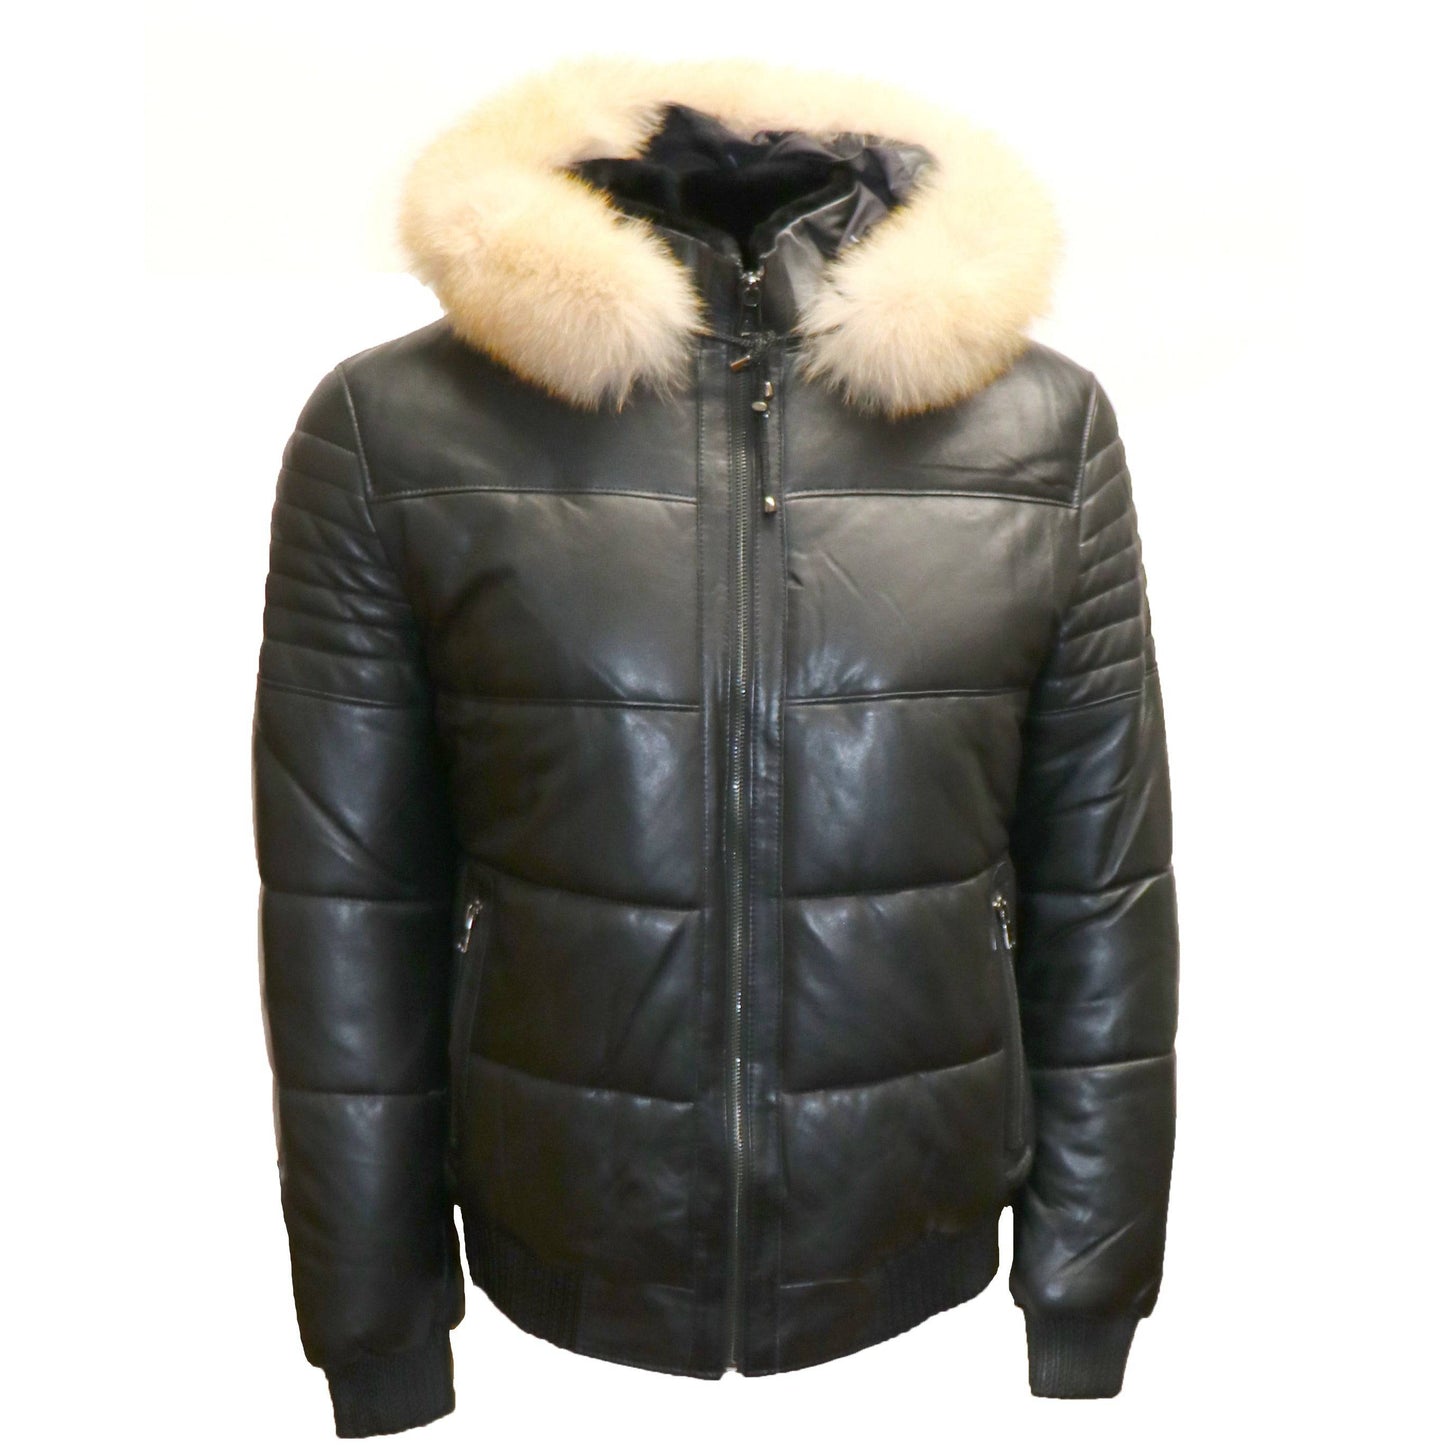 BARYA NEW YORK Men's Puffer Leather Jacket with Fox fur - Zooloo Leather